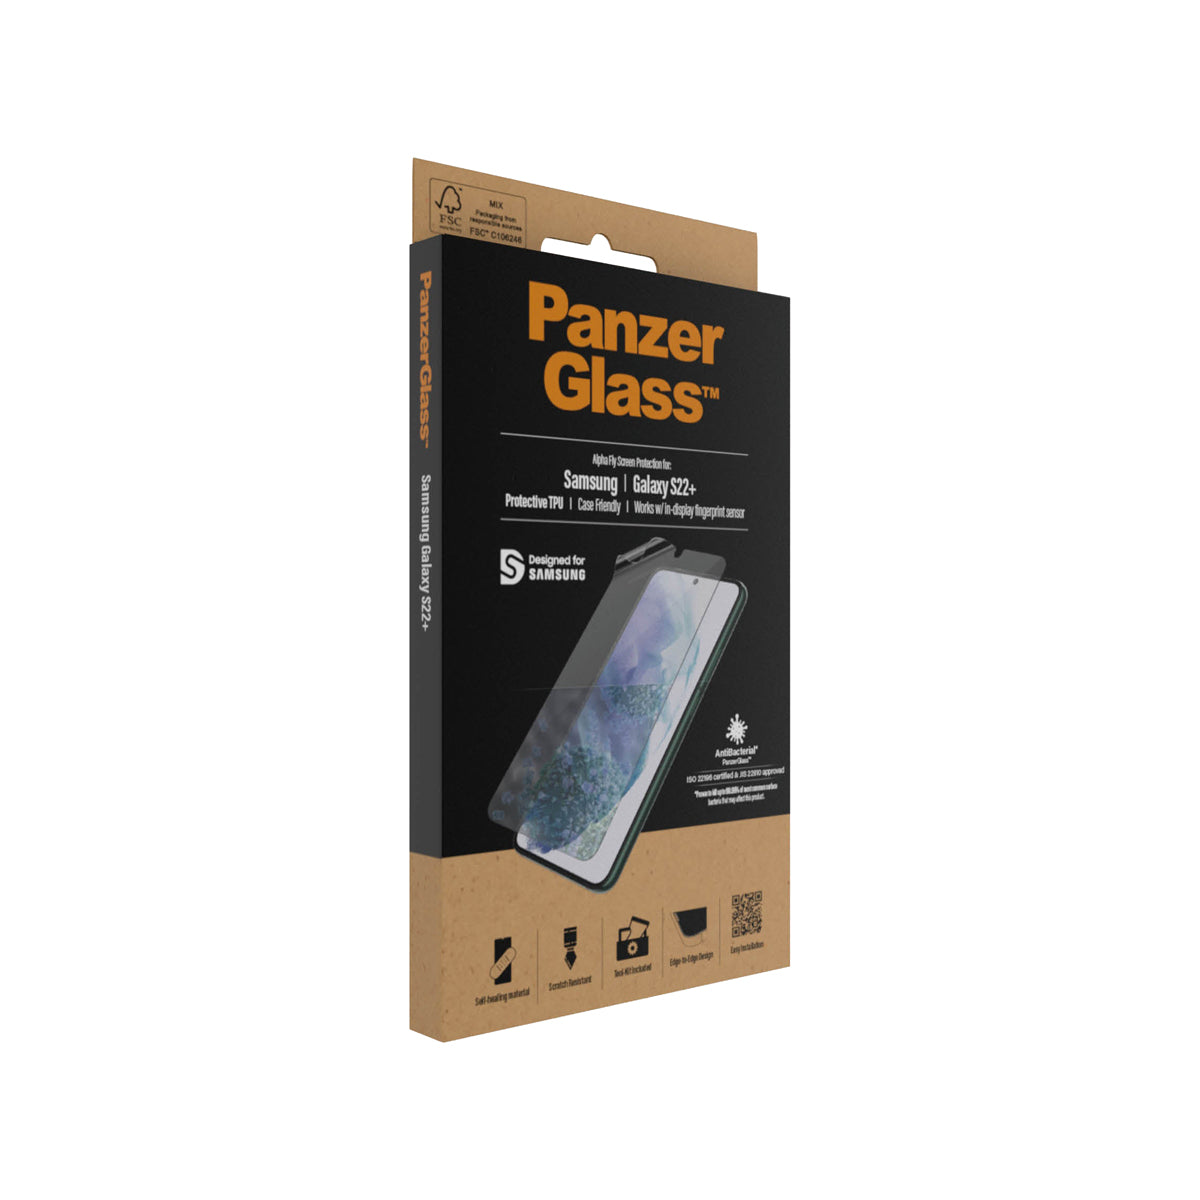 PanzerGlass TPU Antibacterial Phone Screen Pprotector for Samsung GS22+ - Clear.